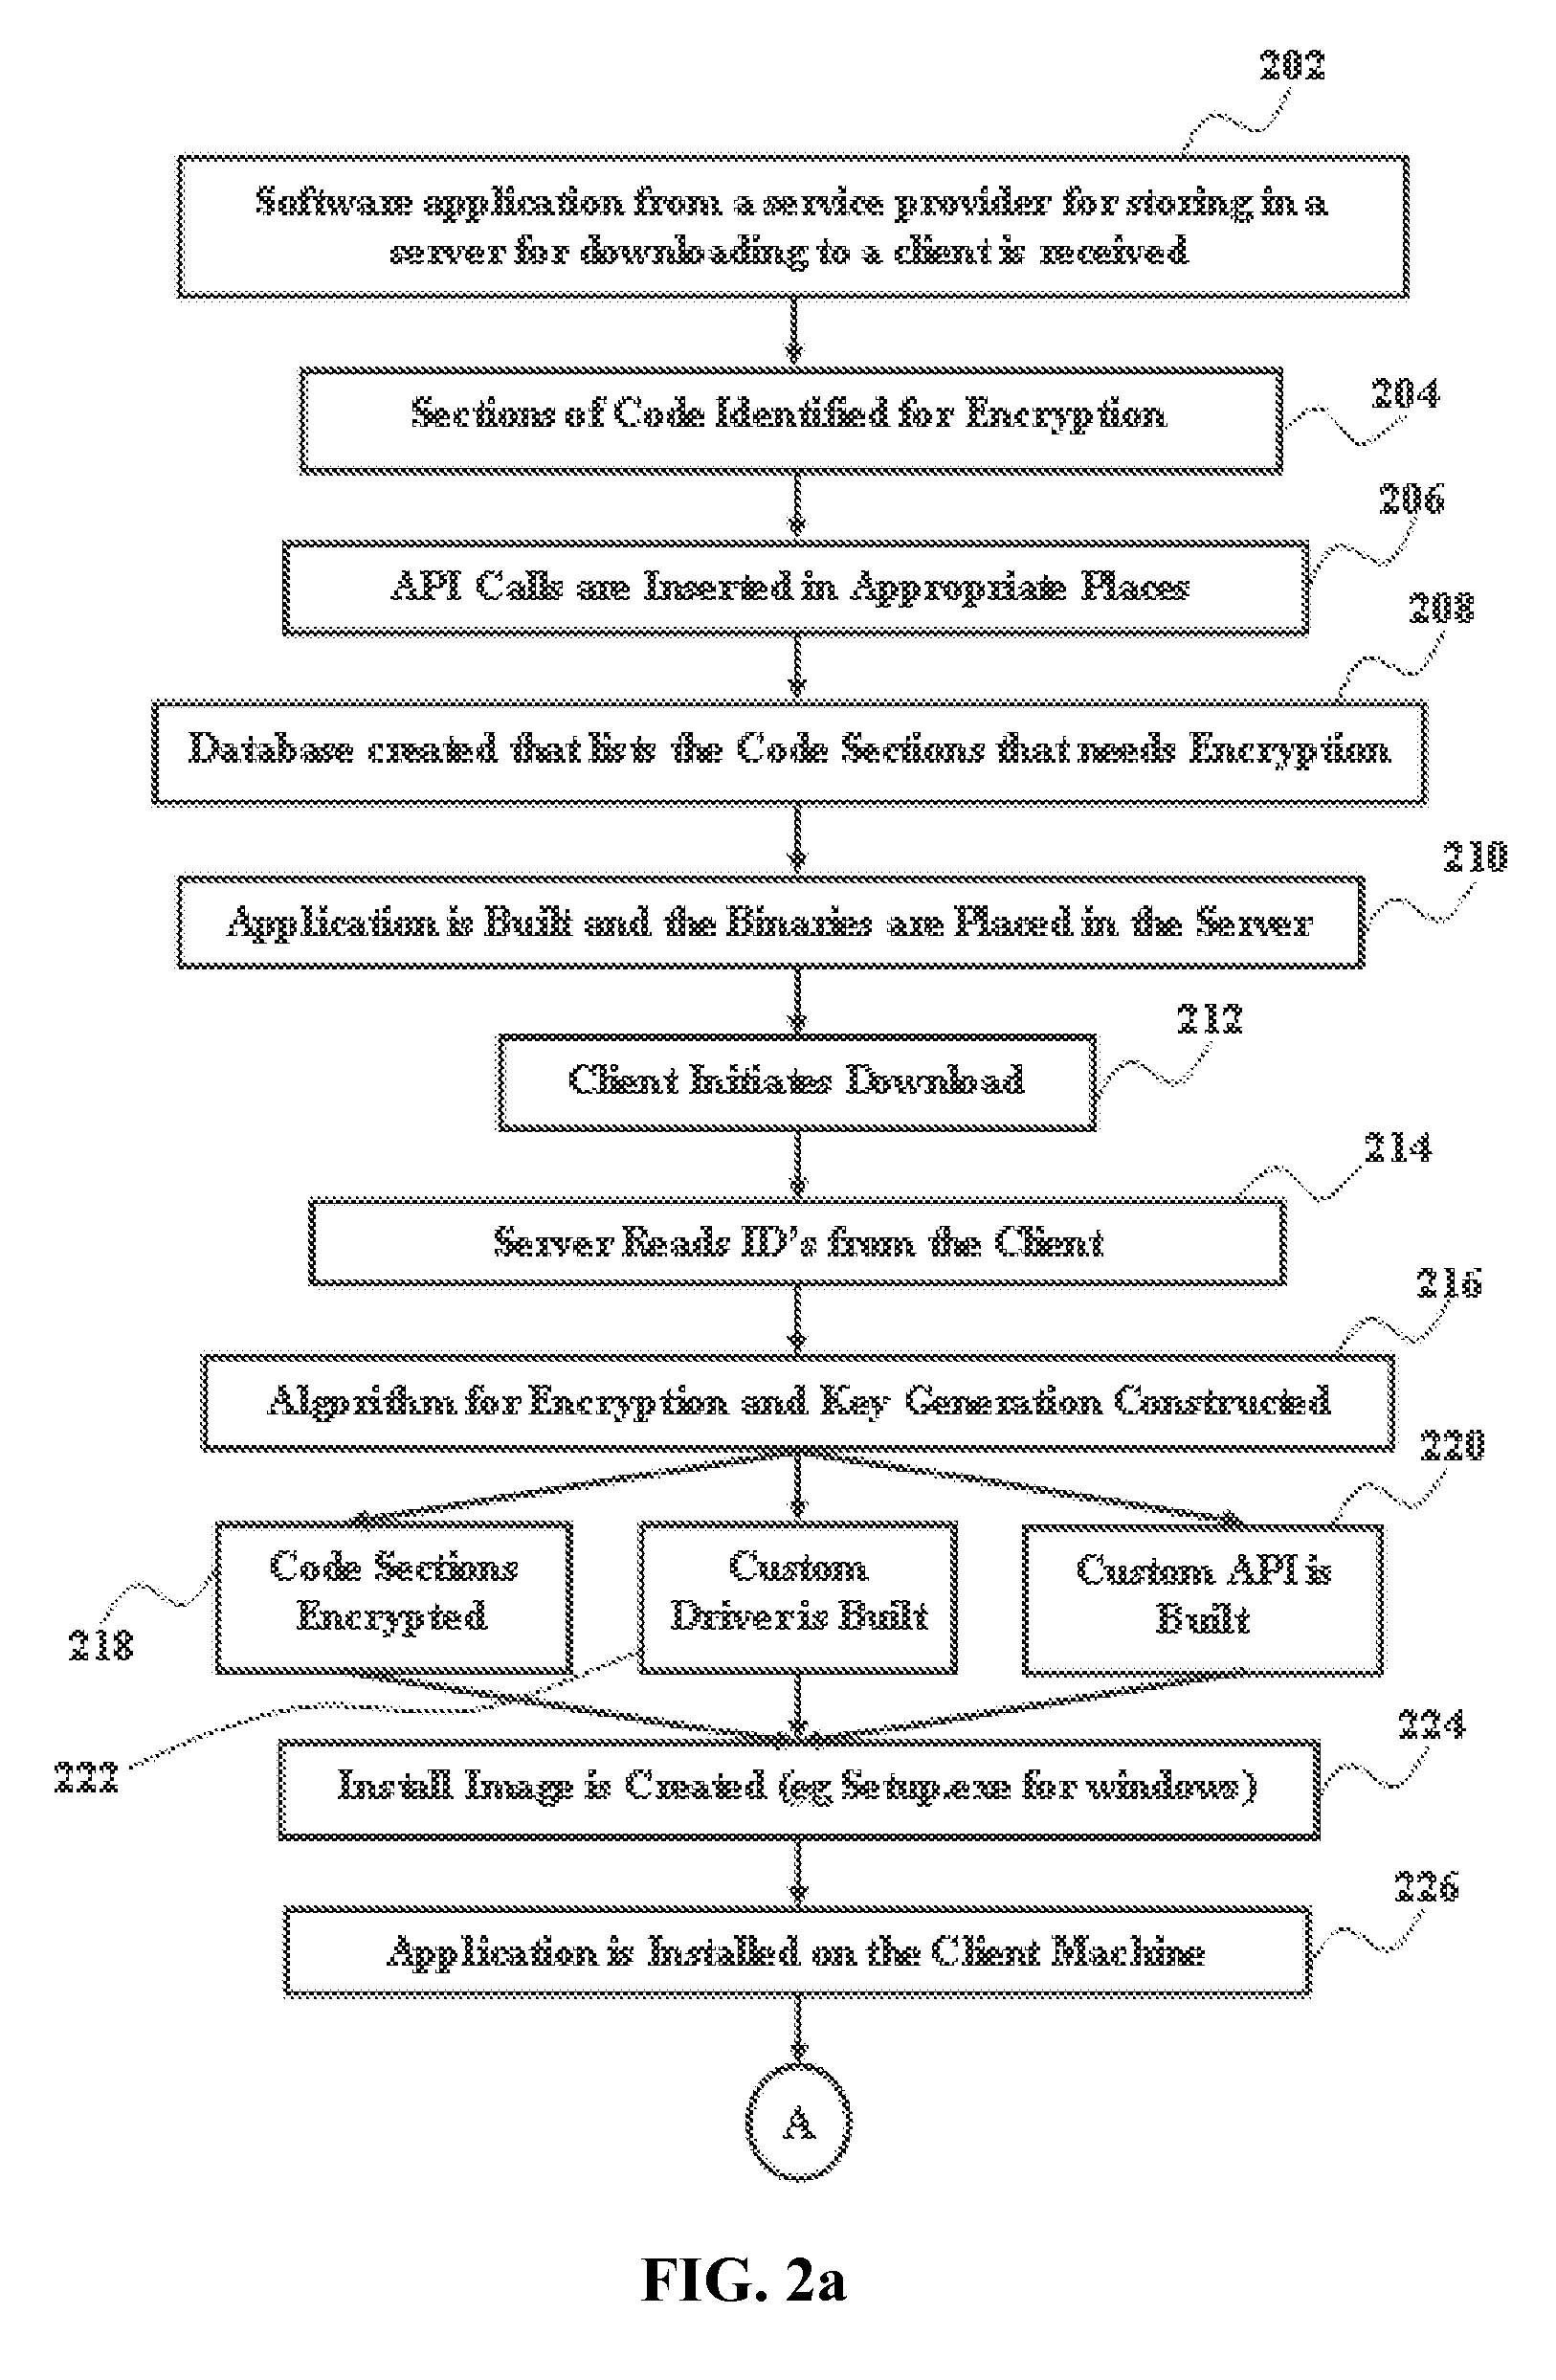 System and Method for Software Protection and Secure Software Distribution